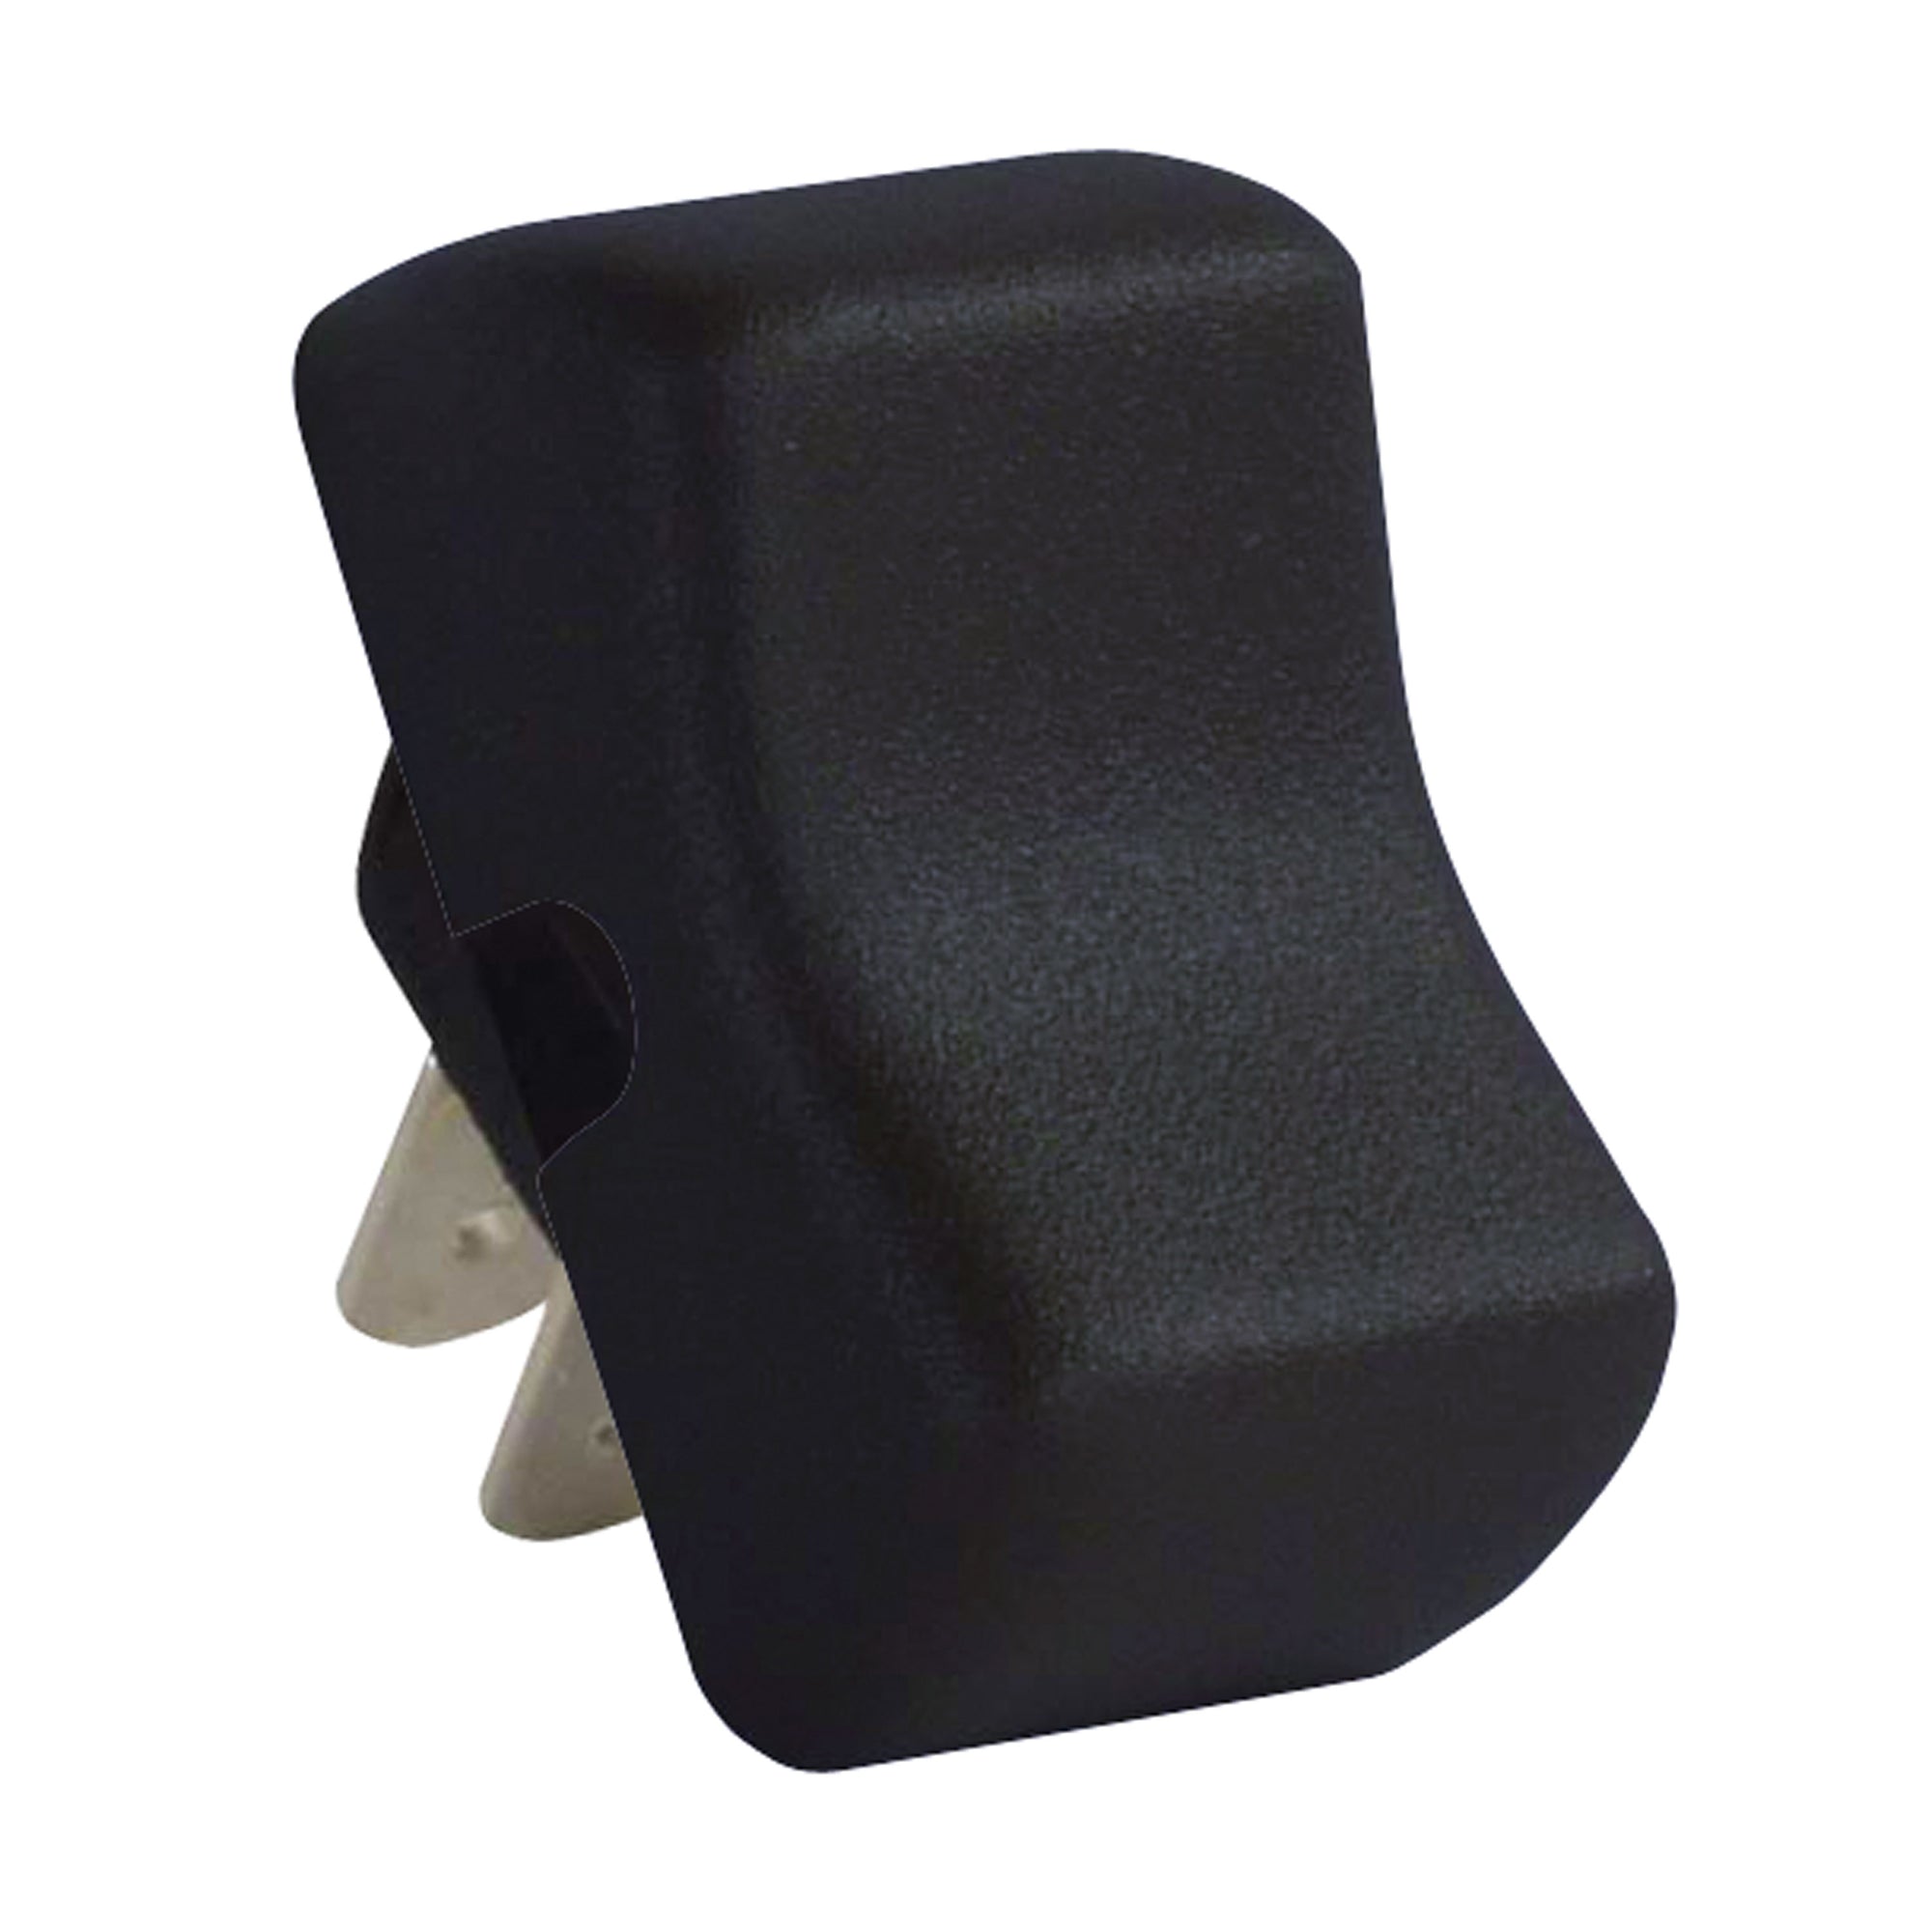 JR Products 12255 On/Off Switch - Black